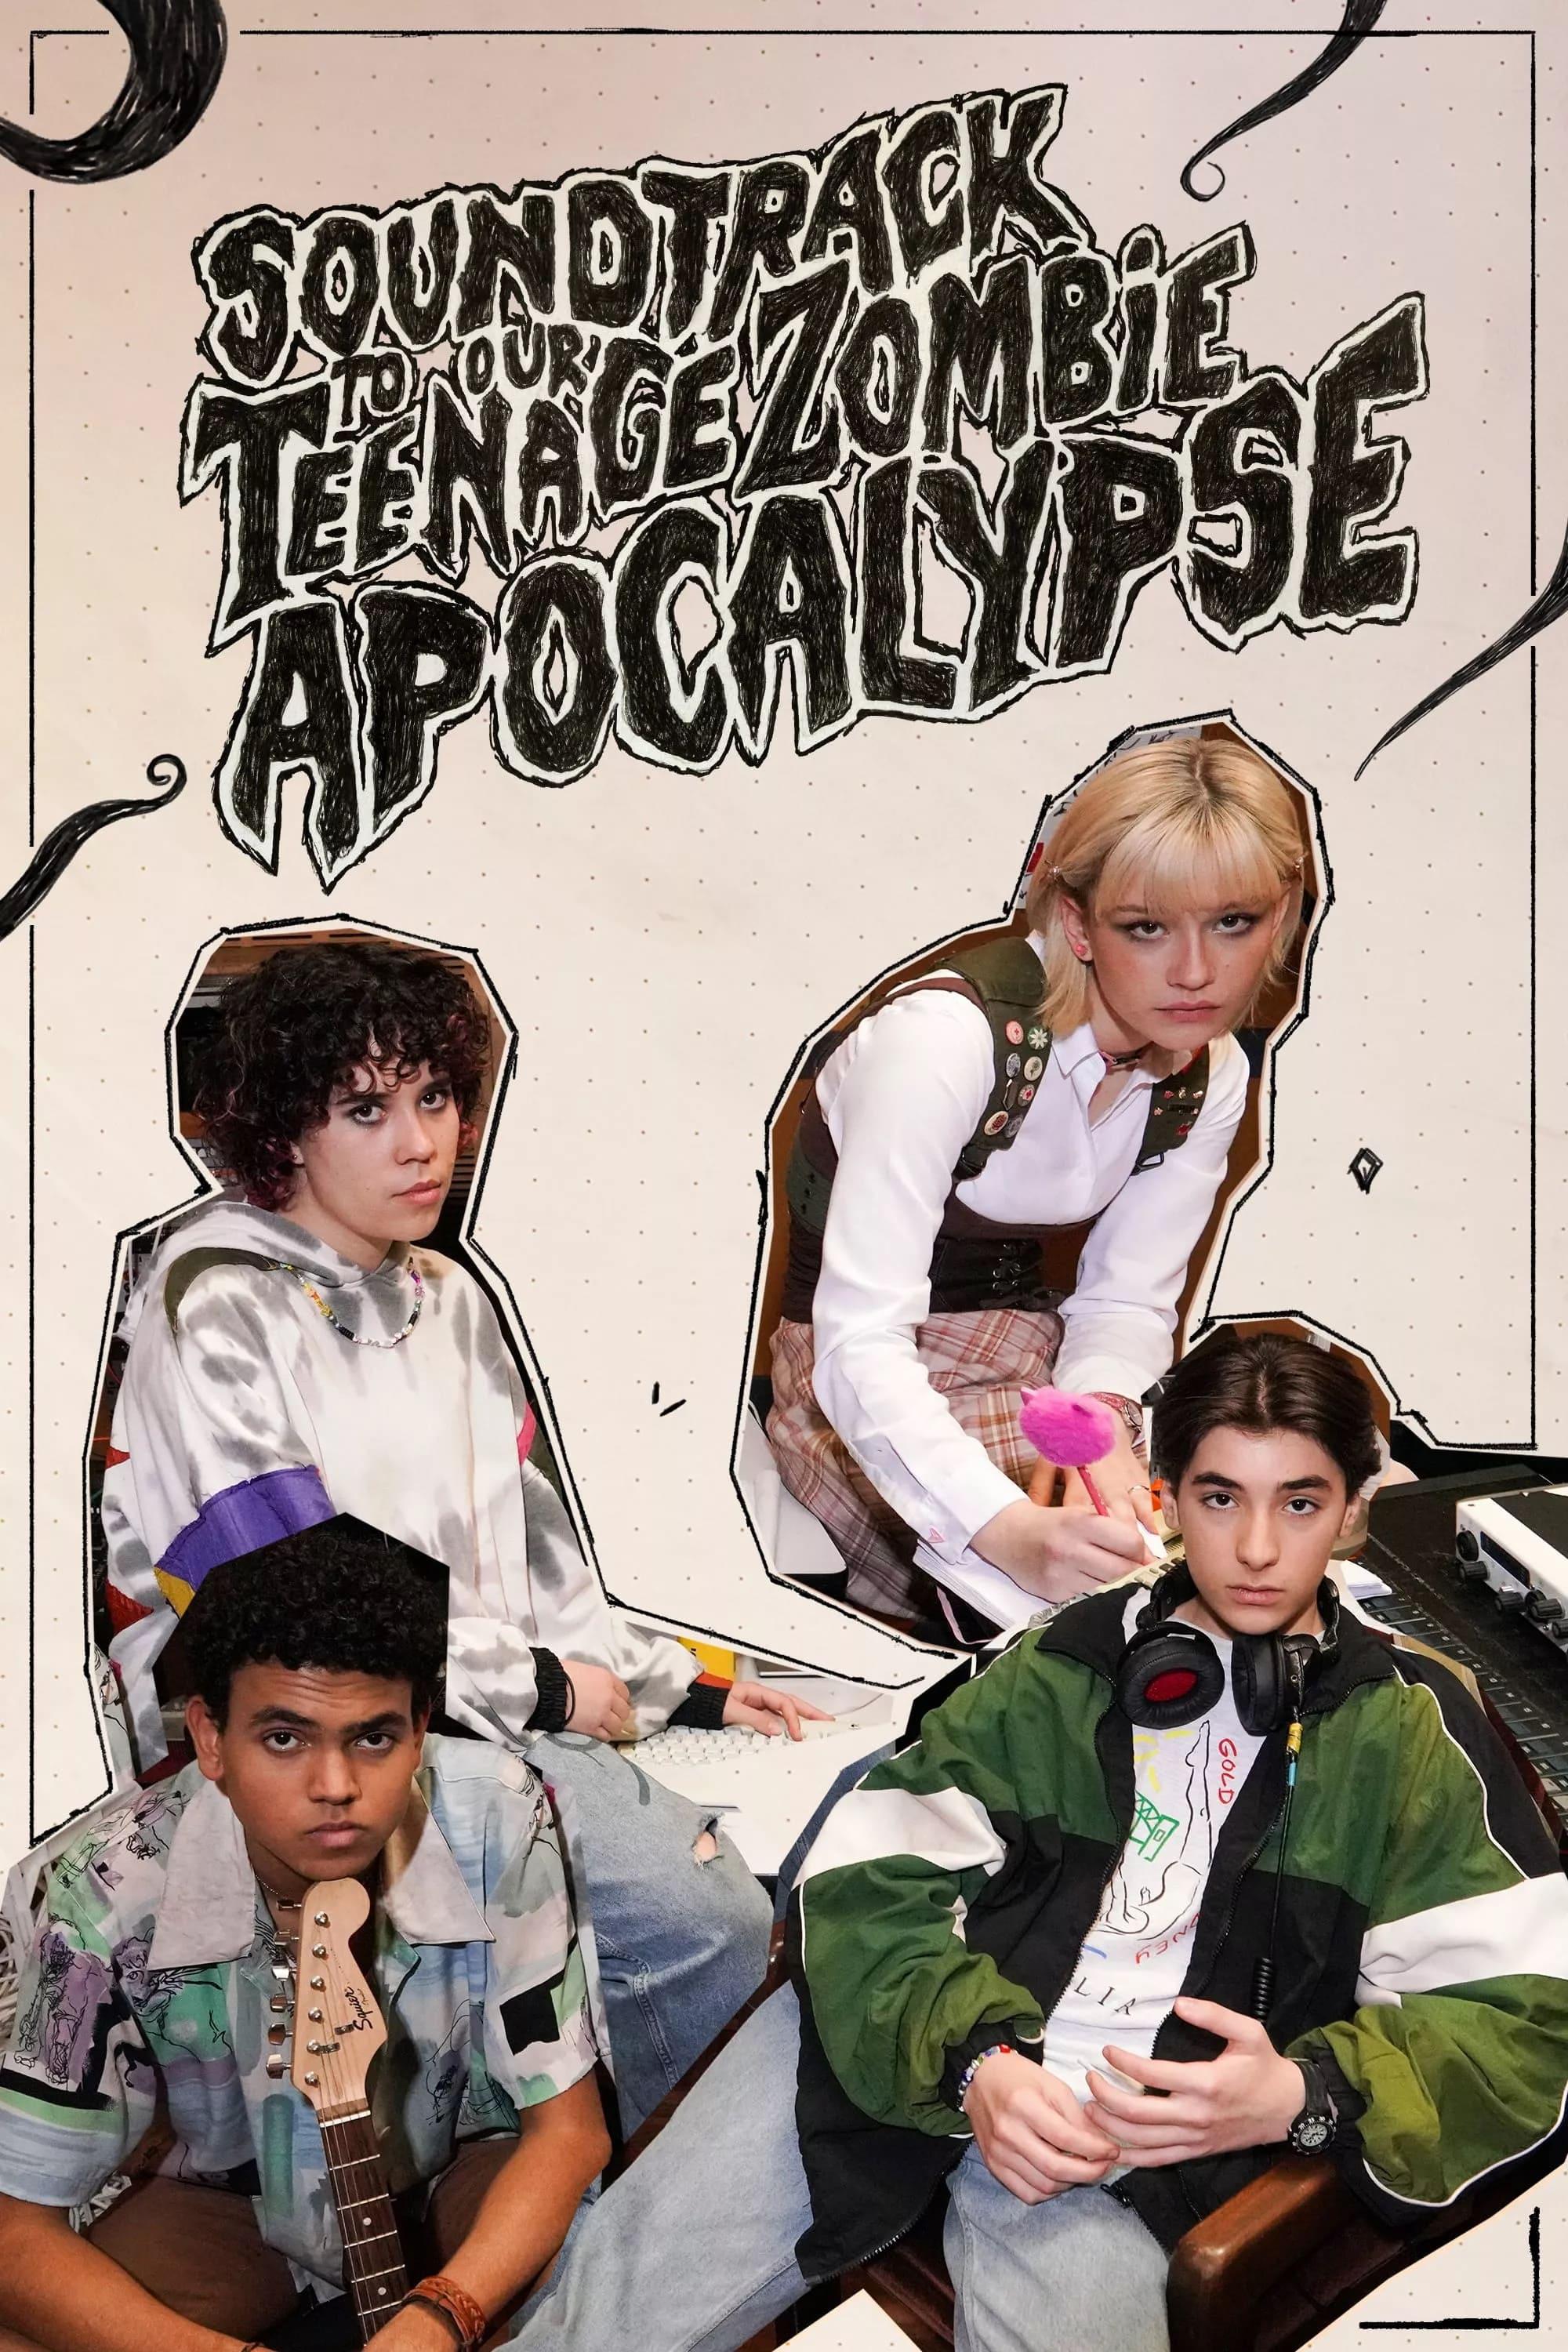 TV ratings for Soundtrack To Our Teenage Zombie Apocalypse in Japón. ABC Me TV series